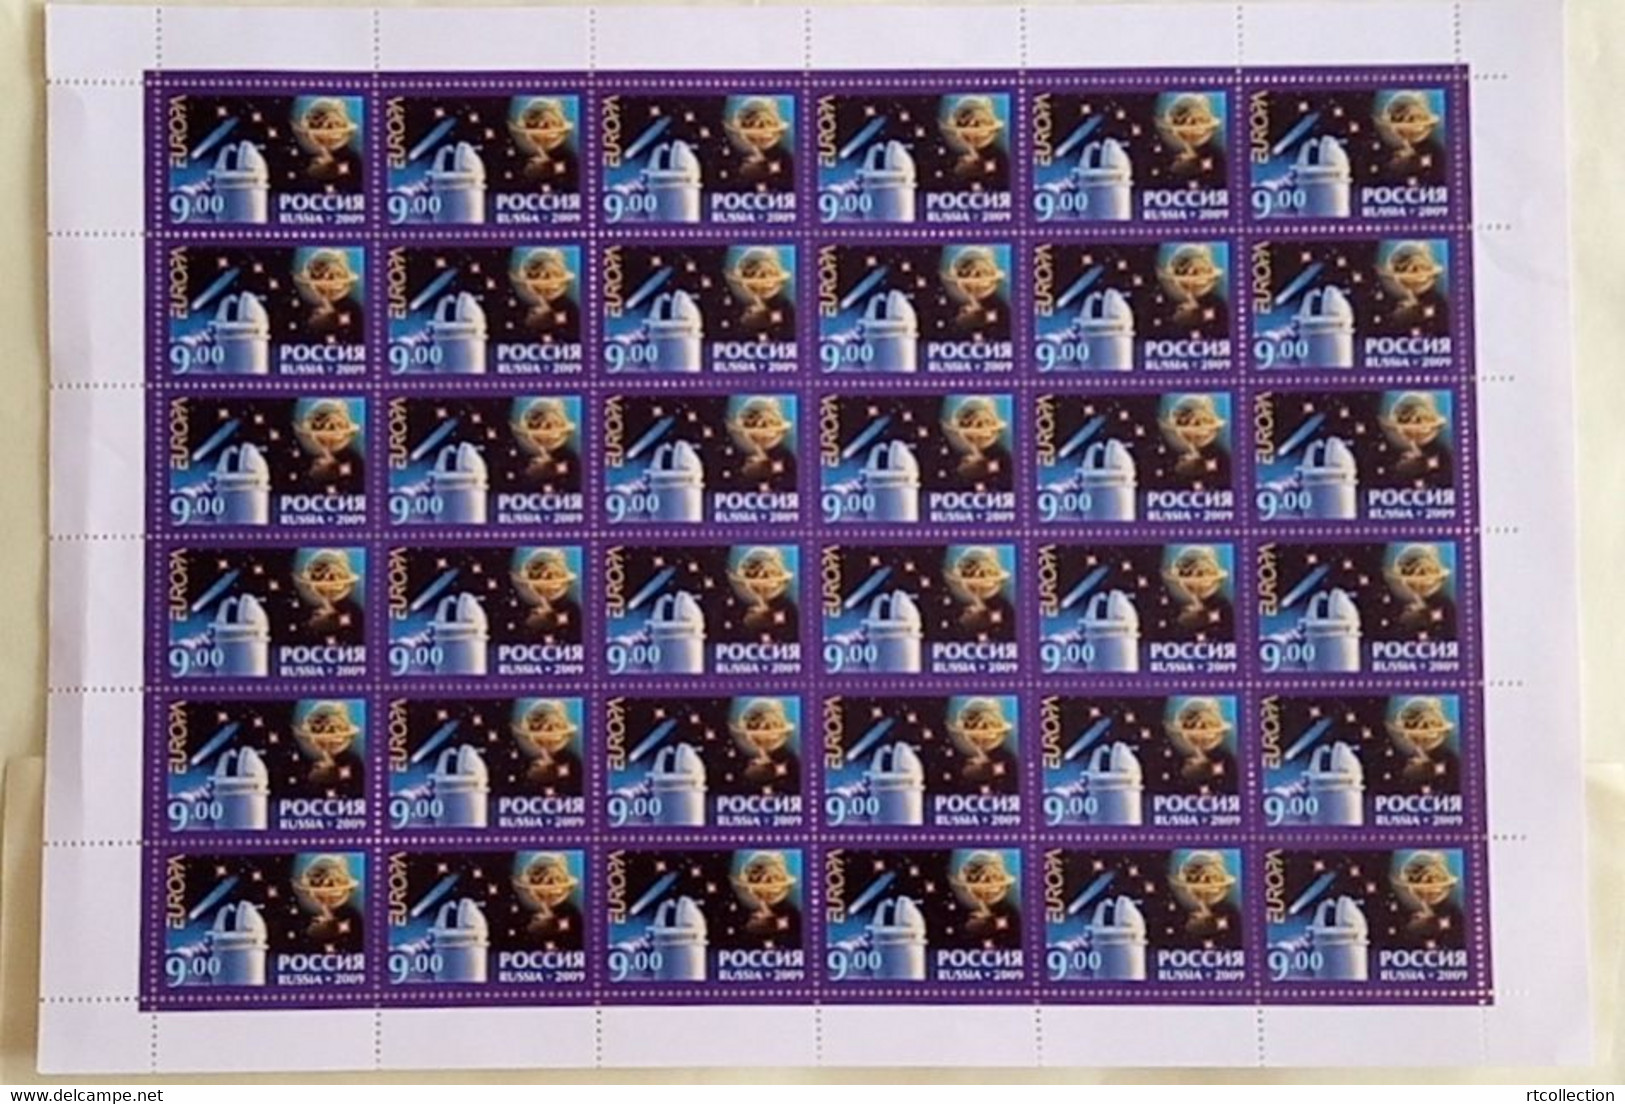 Russia 2009 Sheet Issue By Program Europe Europa-CEPT Europa Sciences Astronomy Space Telescope Stamps Edge Folded - Feuilles Complètes